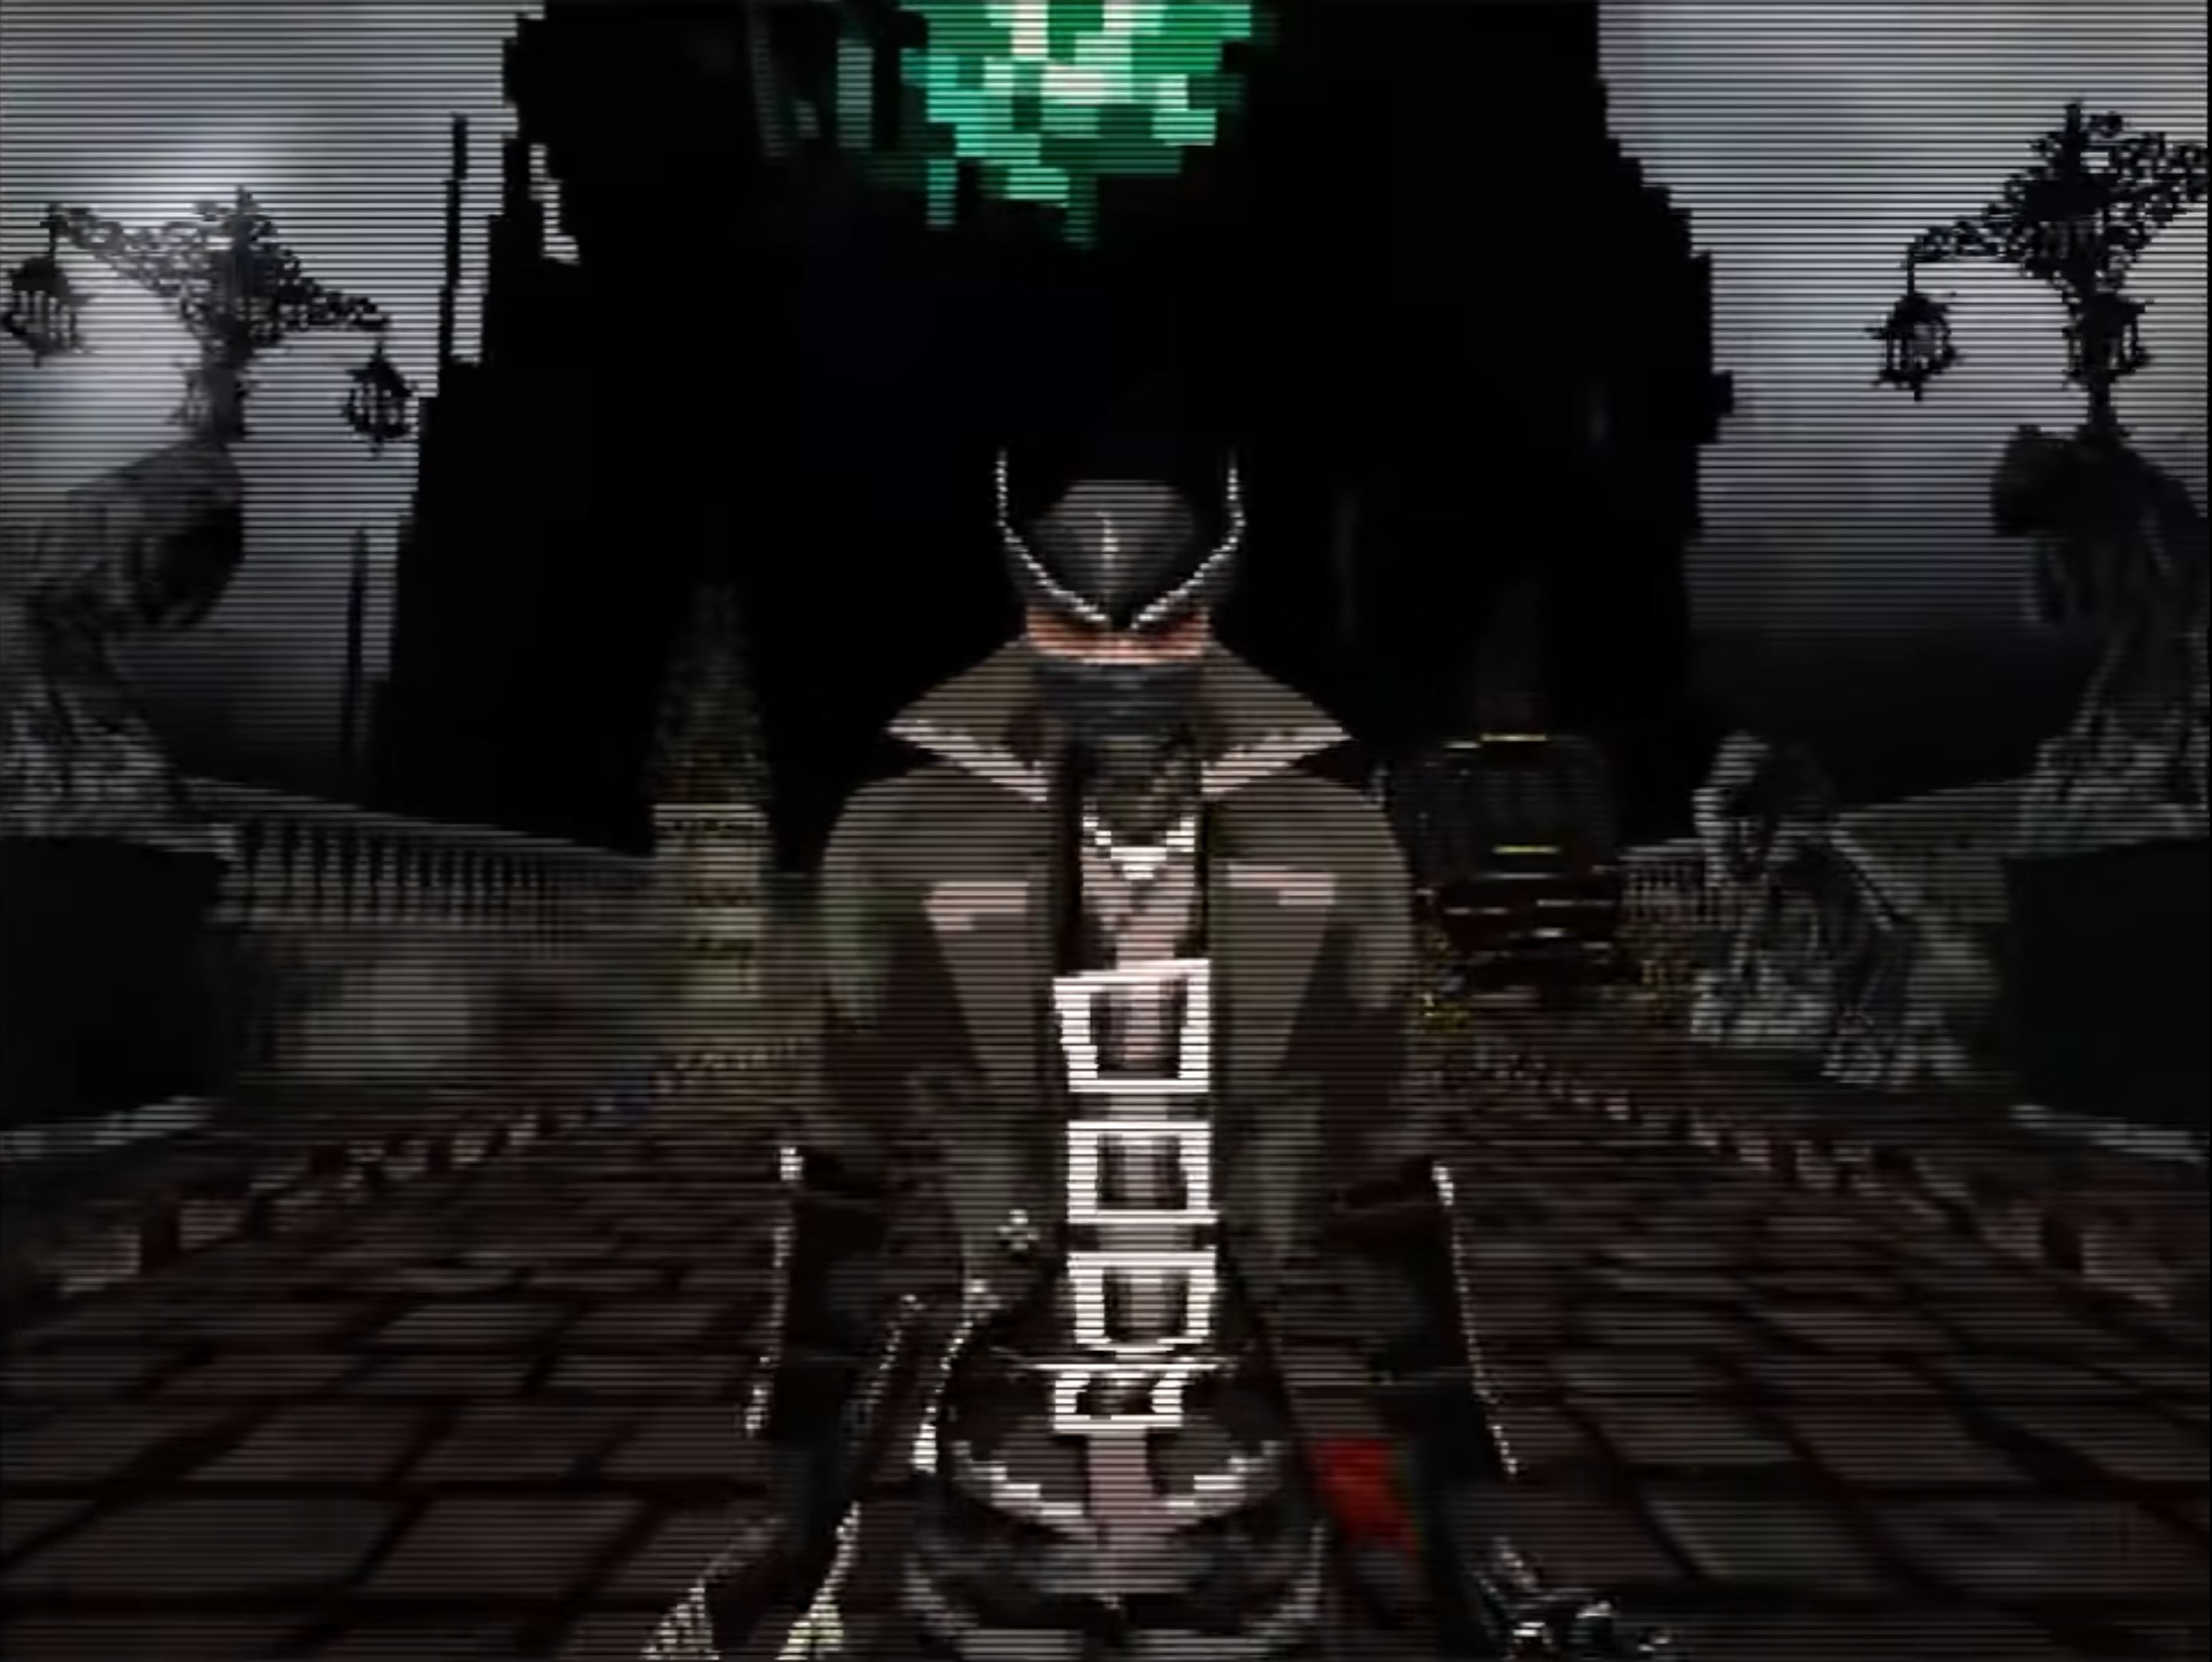 Bloodborne Demake Reminds Us How Lovably Bad PS1 Graphics Were